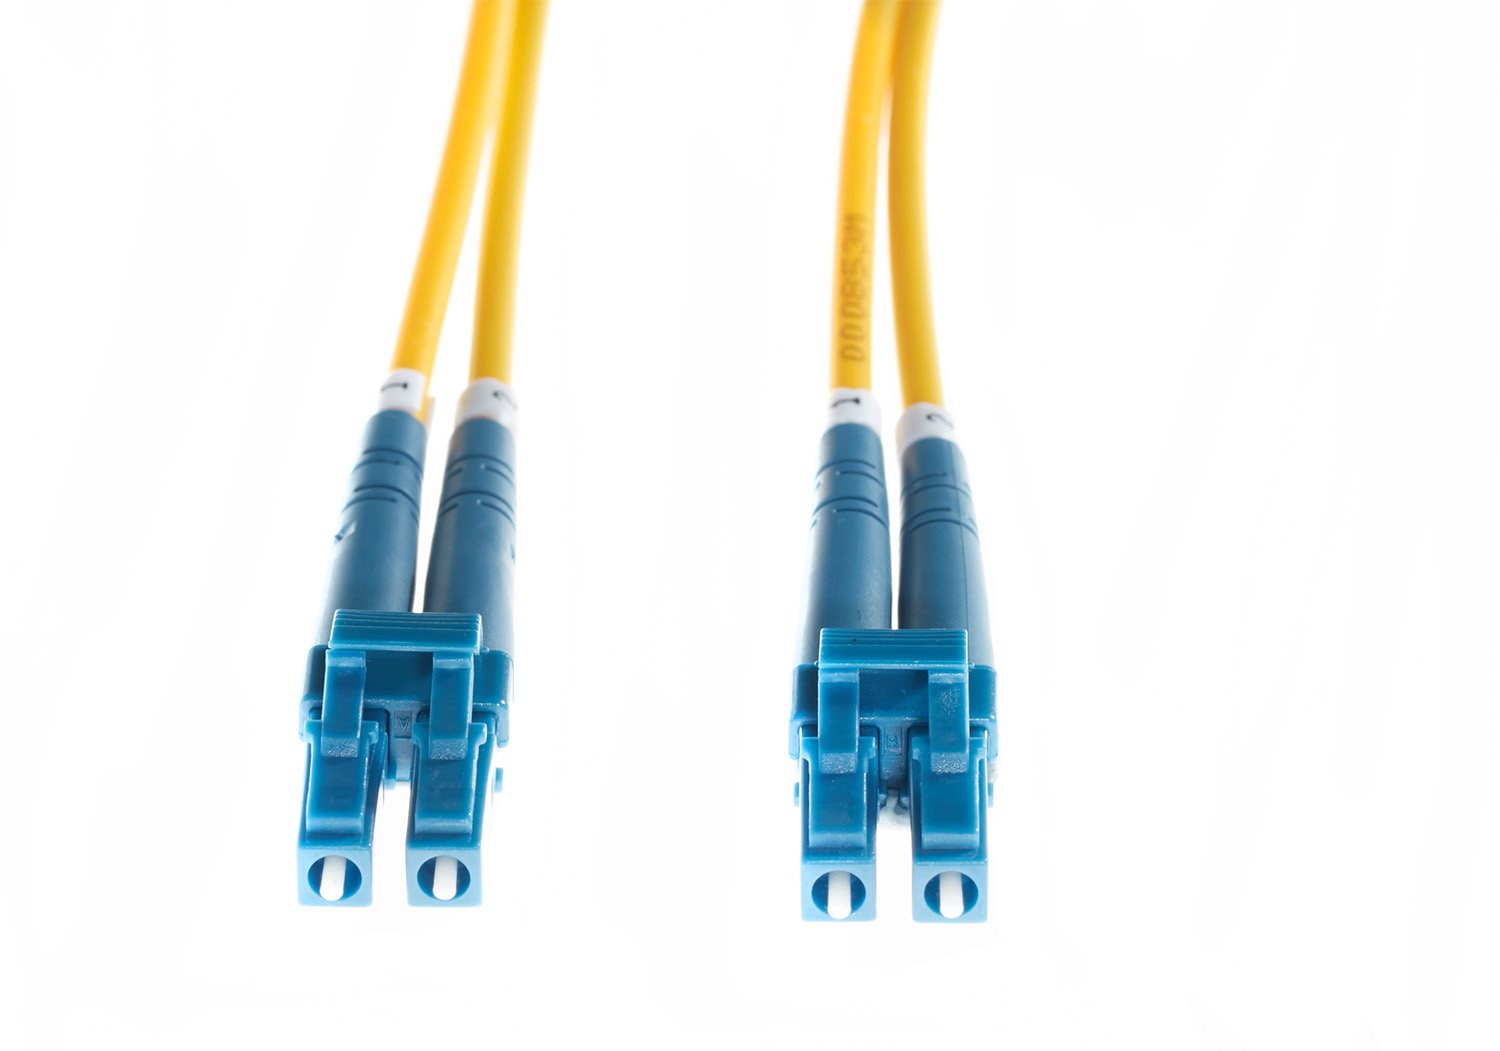 4Cabling 3M LC-LC Os1 / Os2 Singlemode Fibre Optic Cable : Yellow